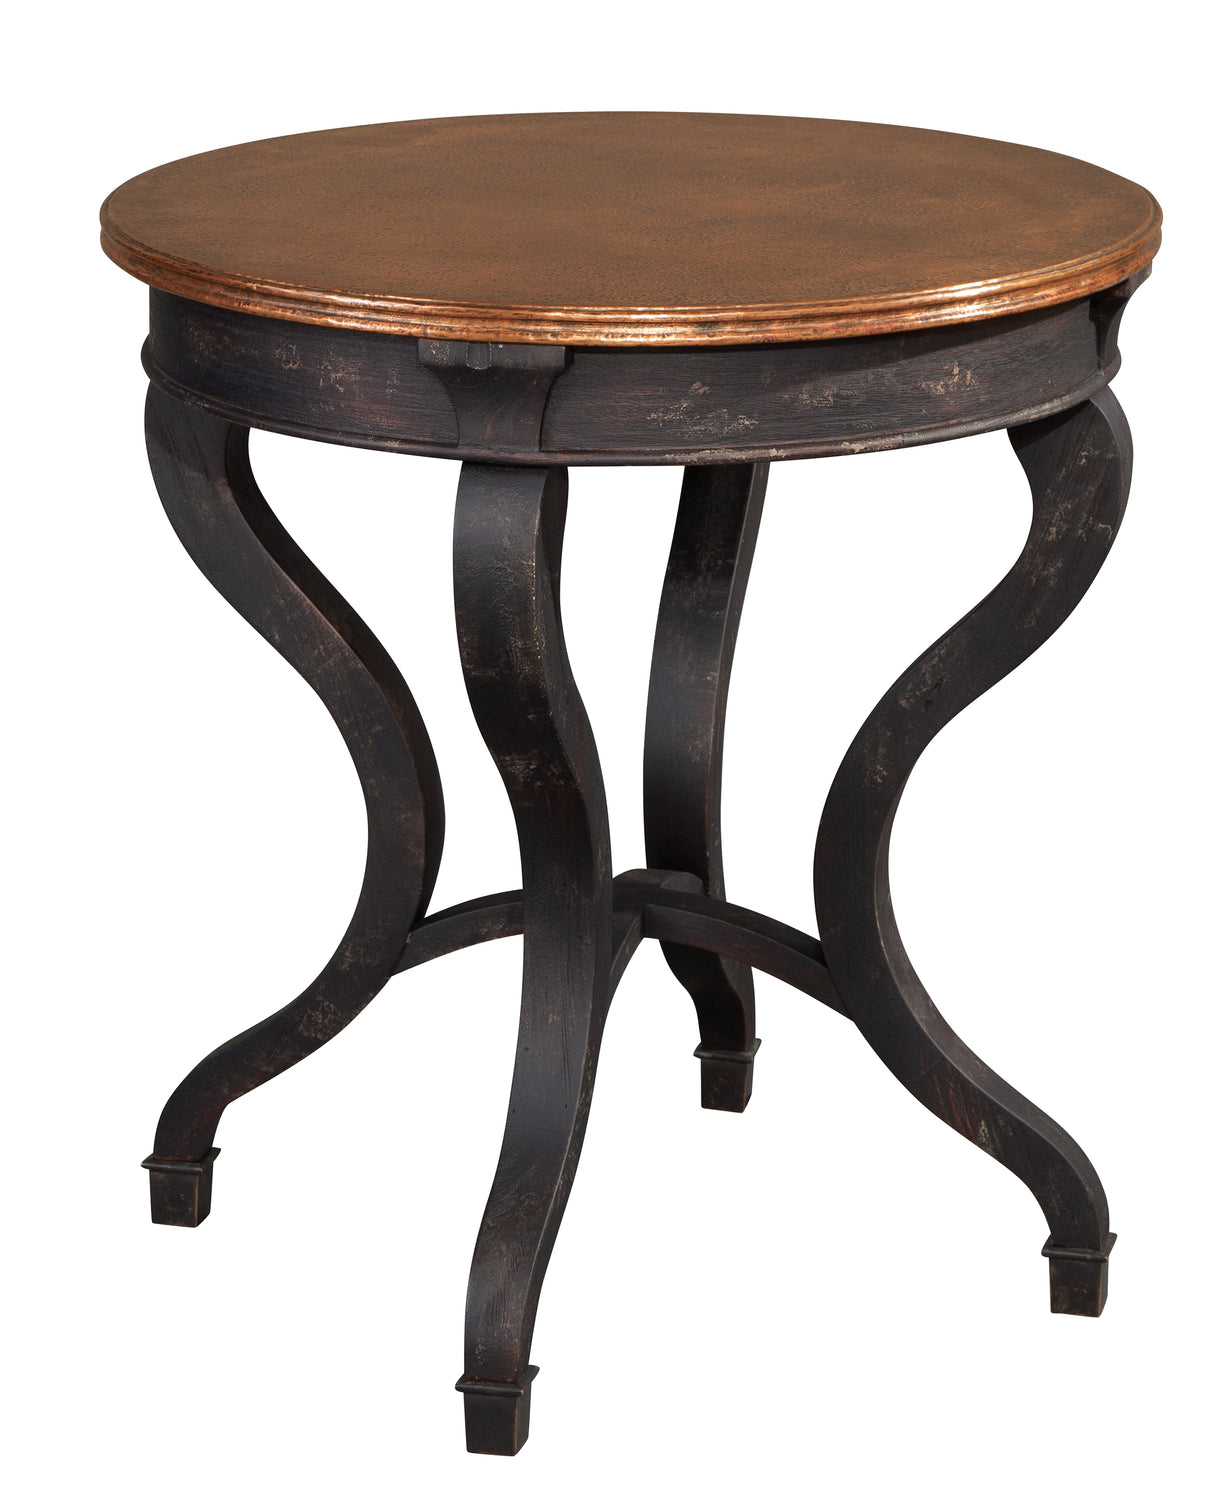 Hekman 15106 Accents 26.25in. x 26.25in. x 28.25in. End Table